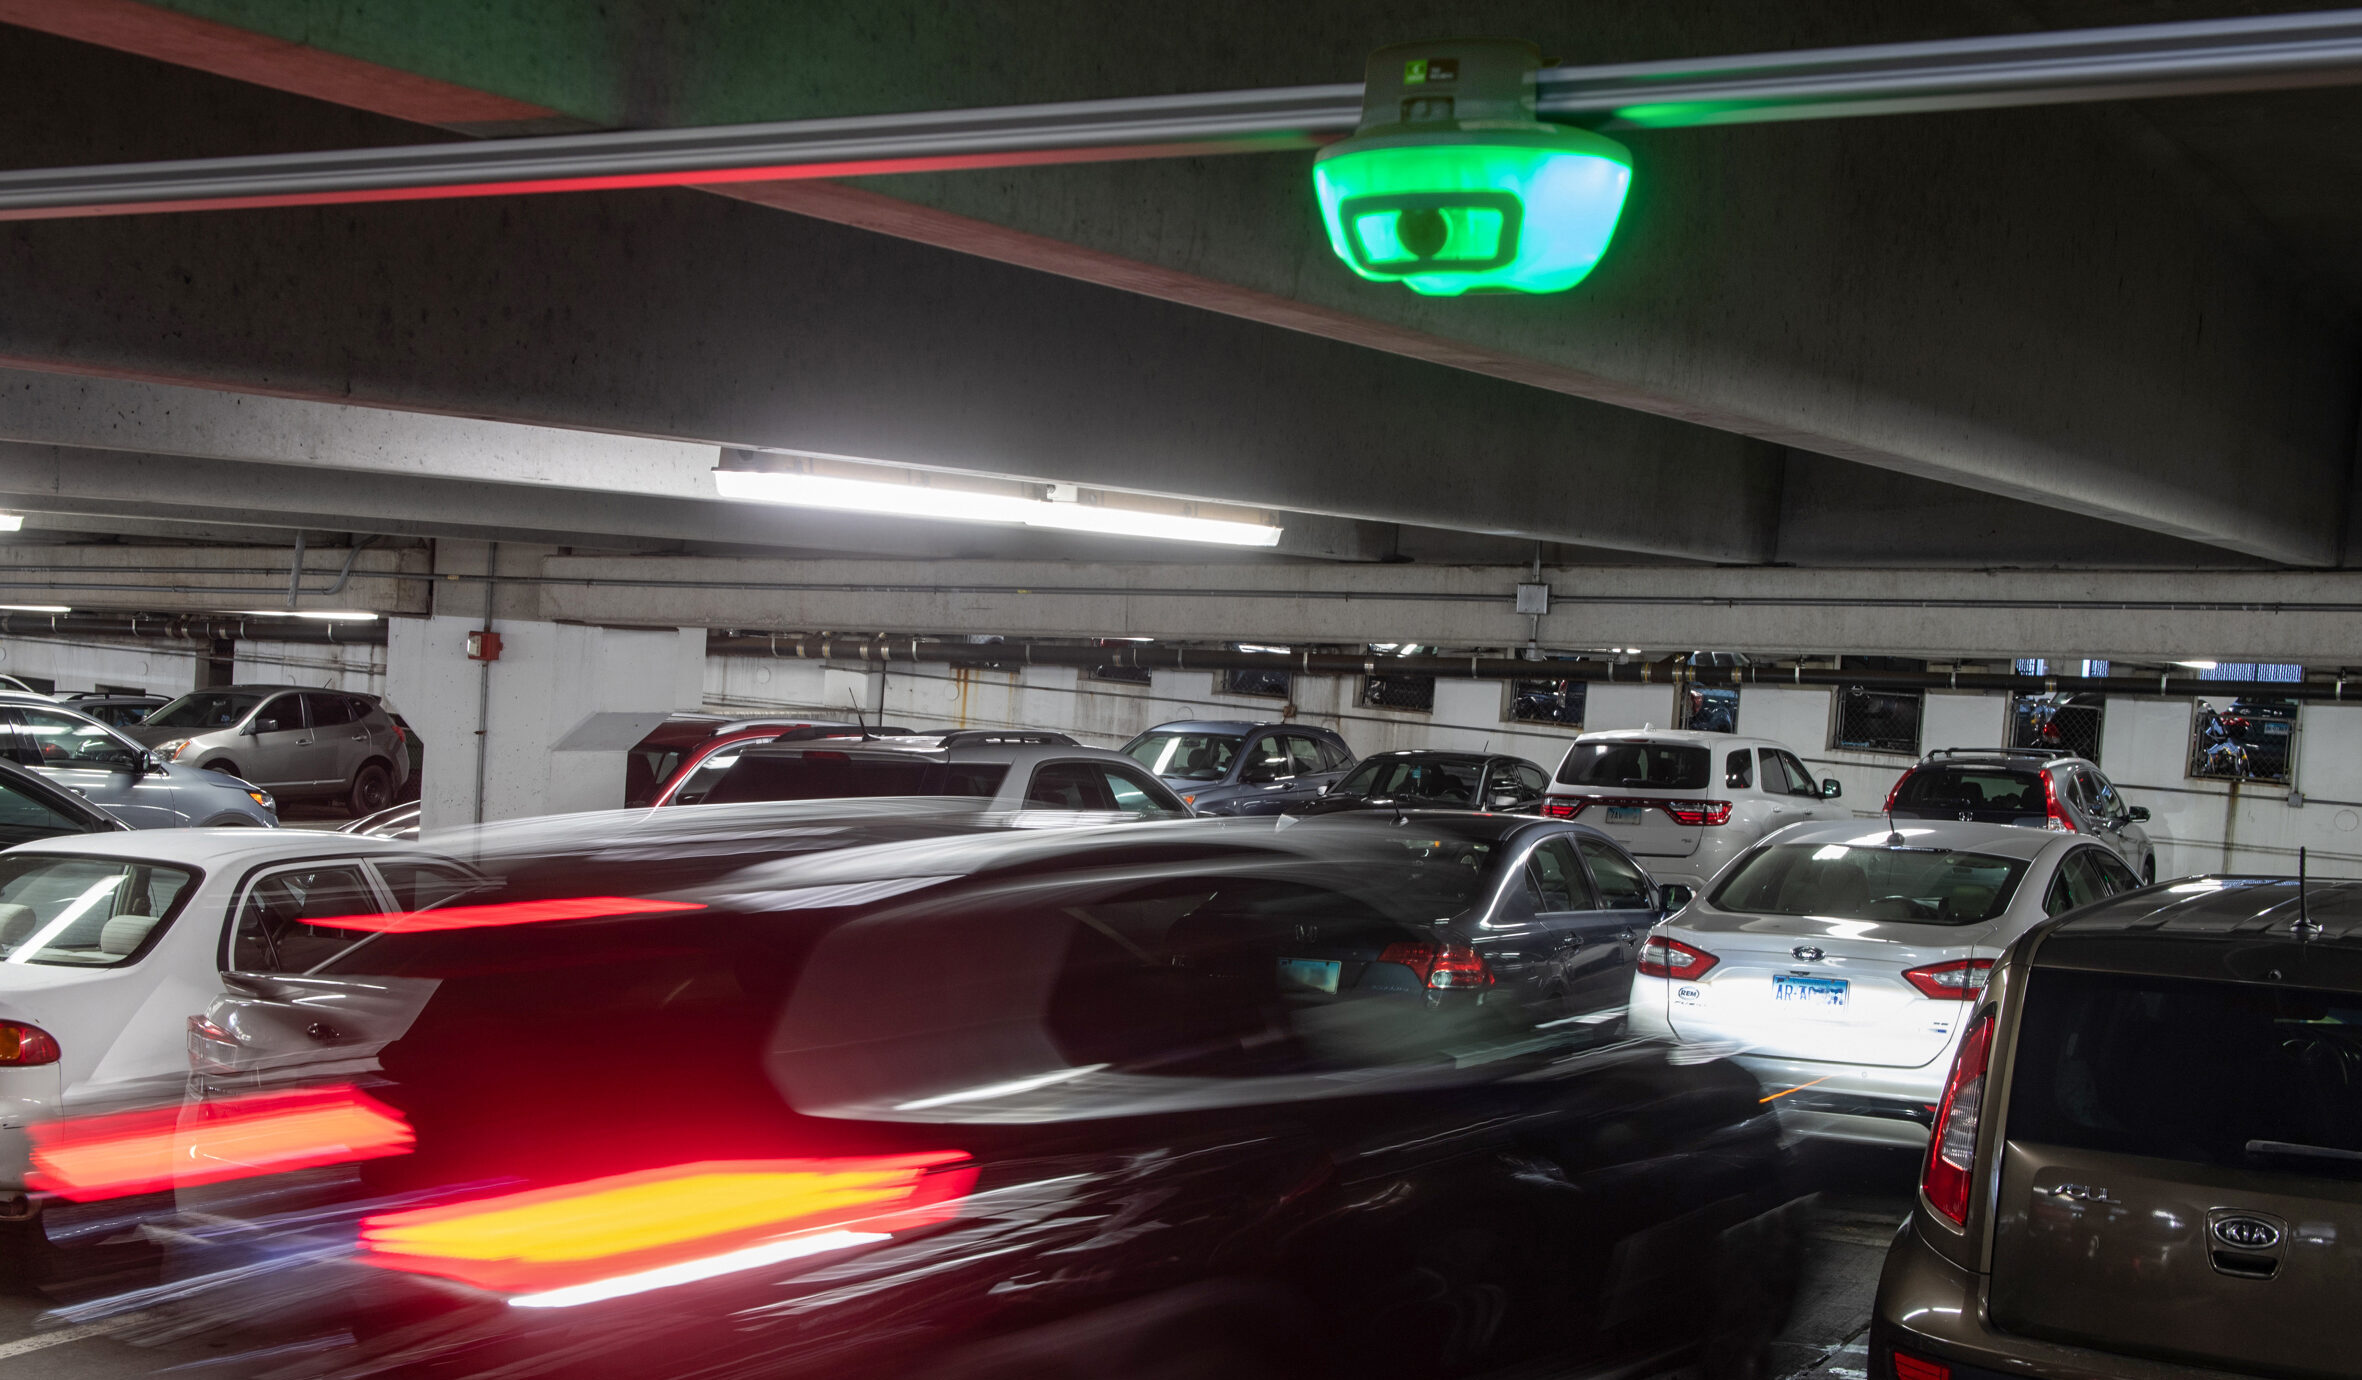 Parking garage operators using an APGS to maximize garage efficiency and revenue